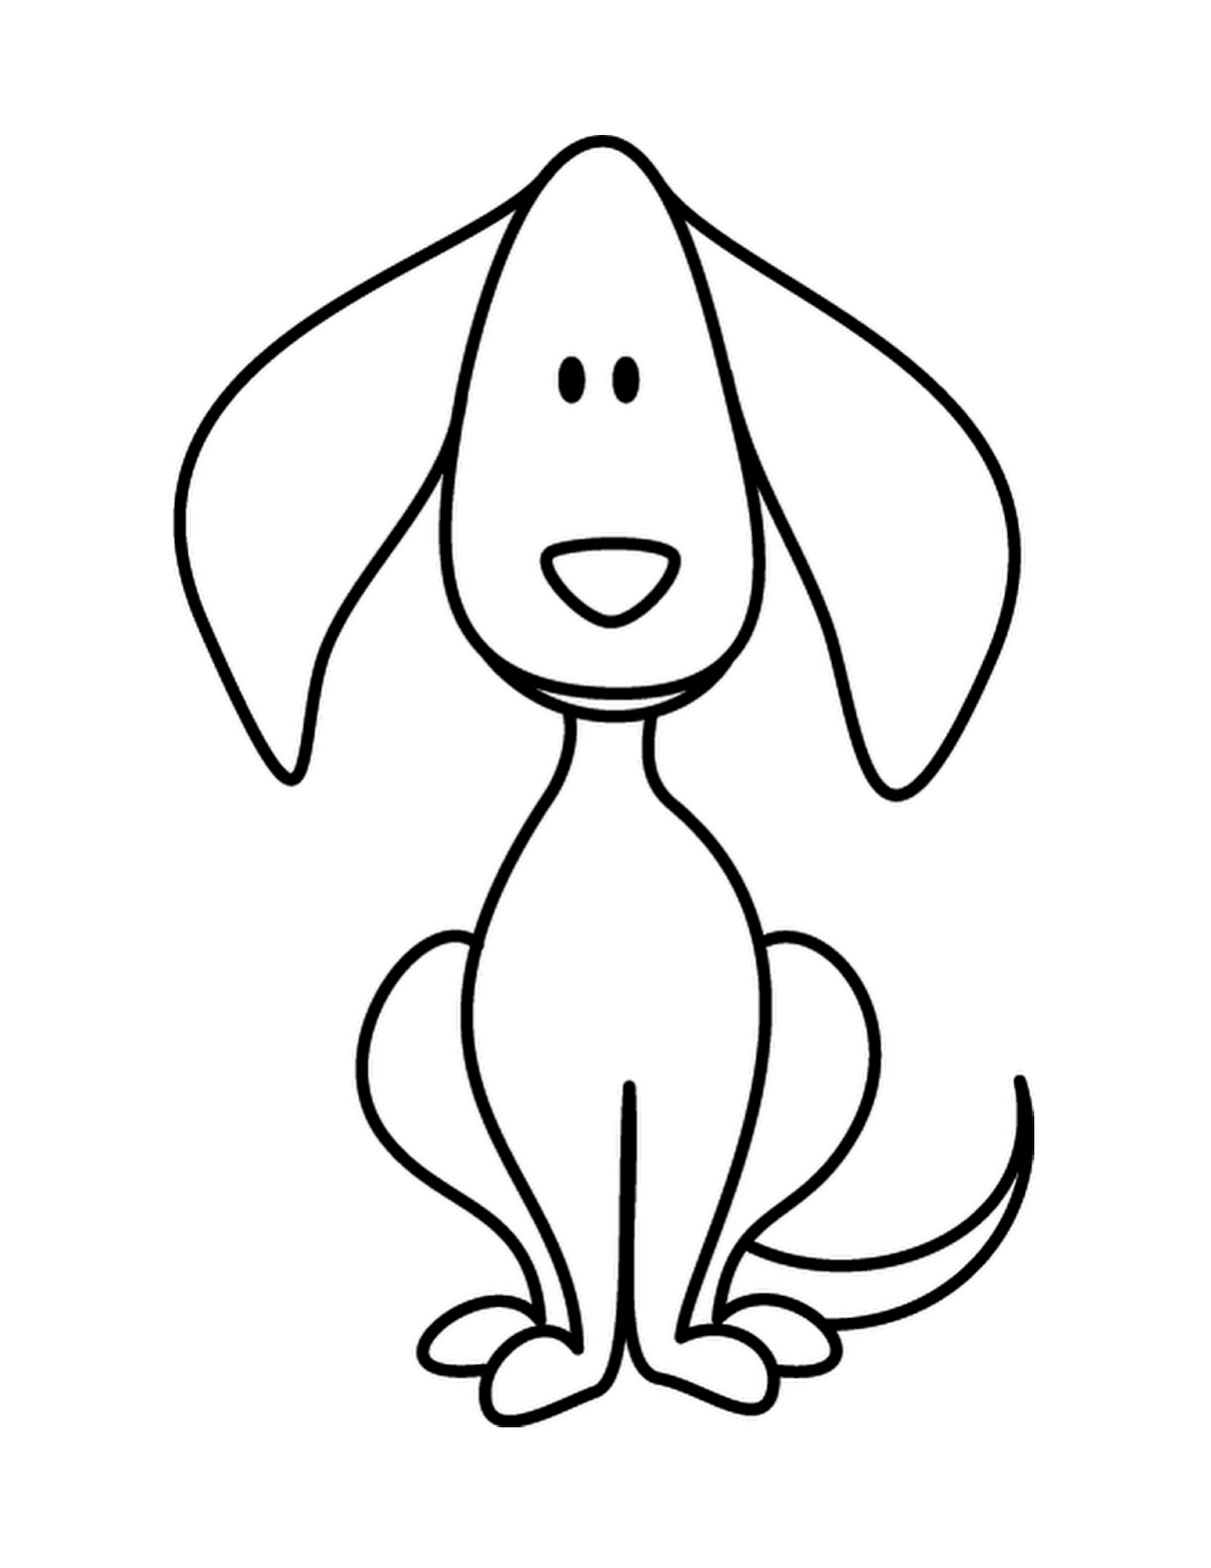 Simple Drawing Of Dogs - ClipArt Best